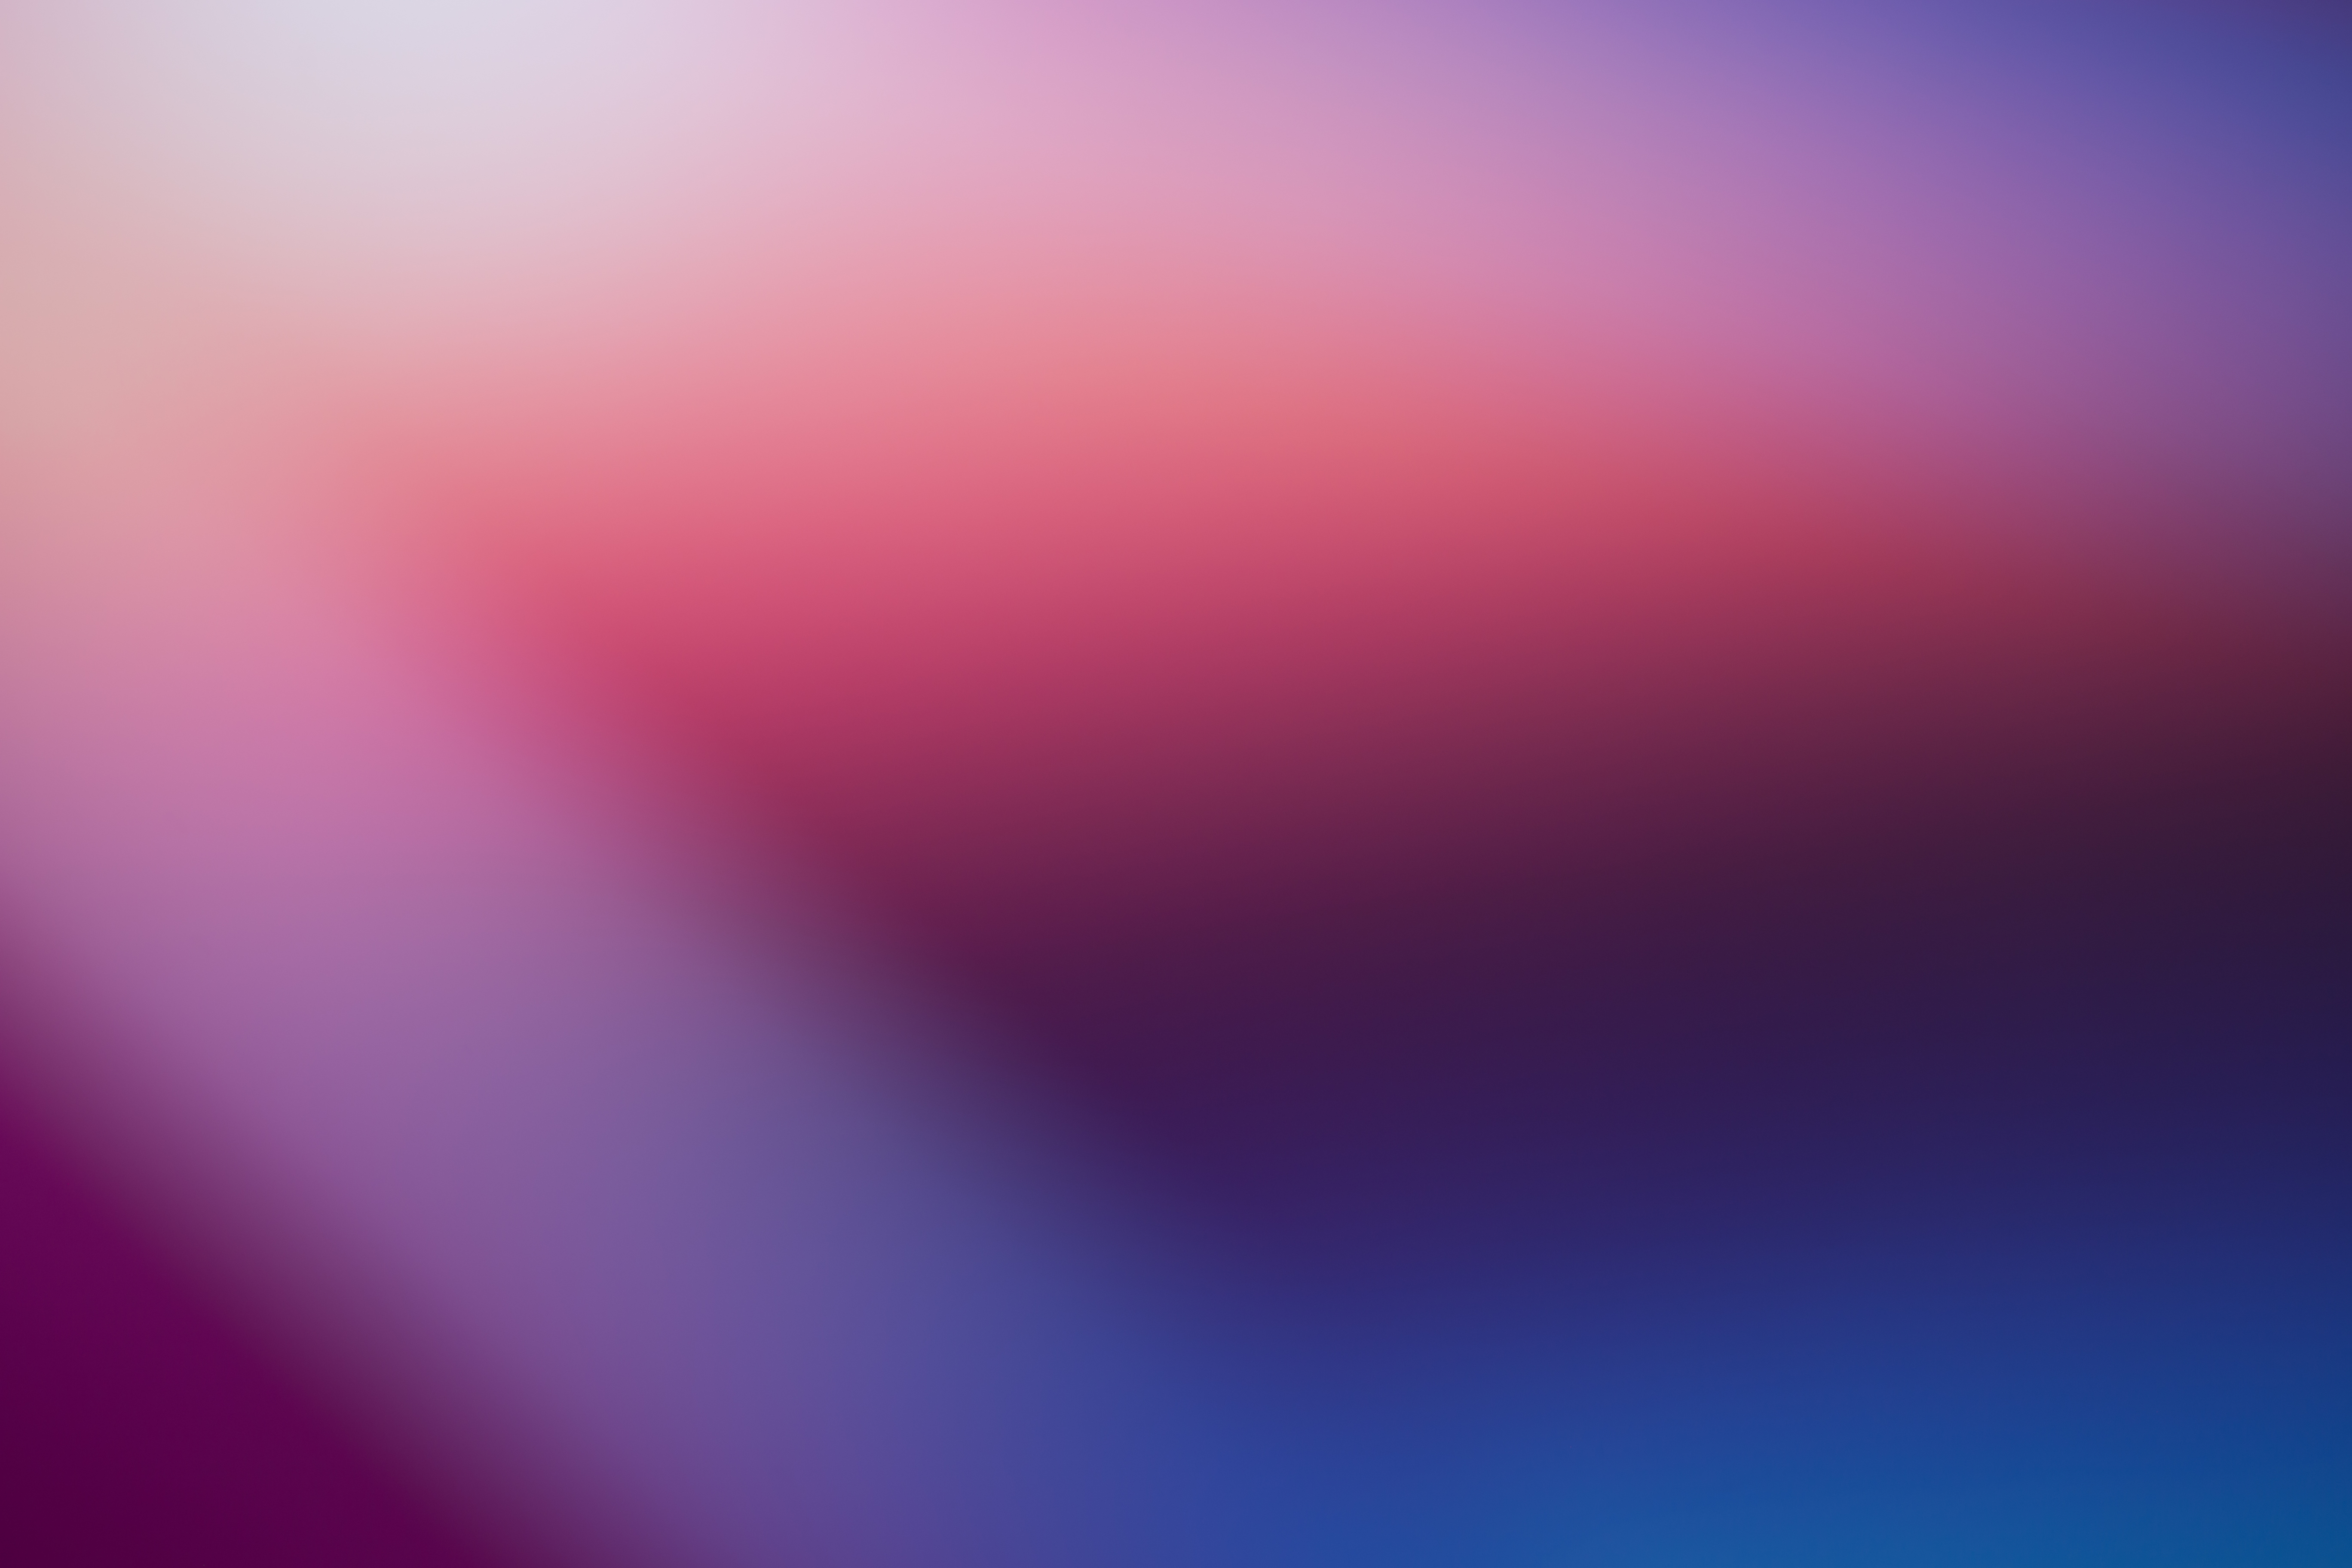 gradient, color, purple, abstract, pink, violet